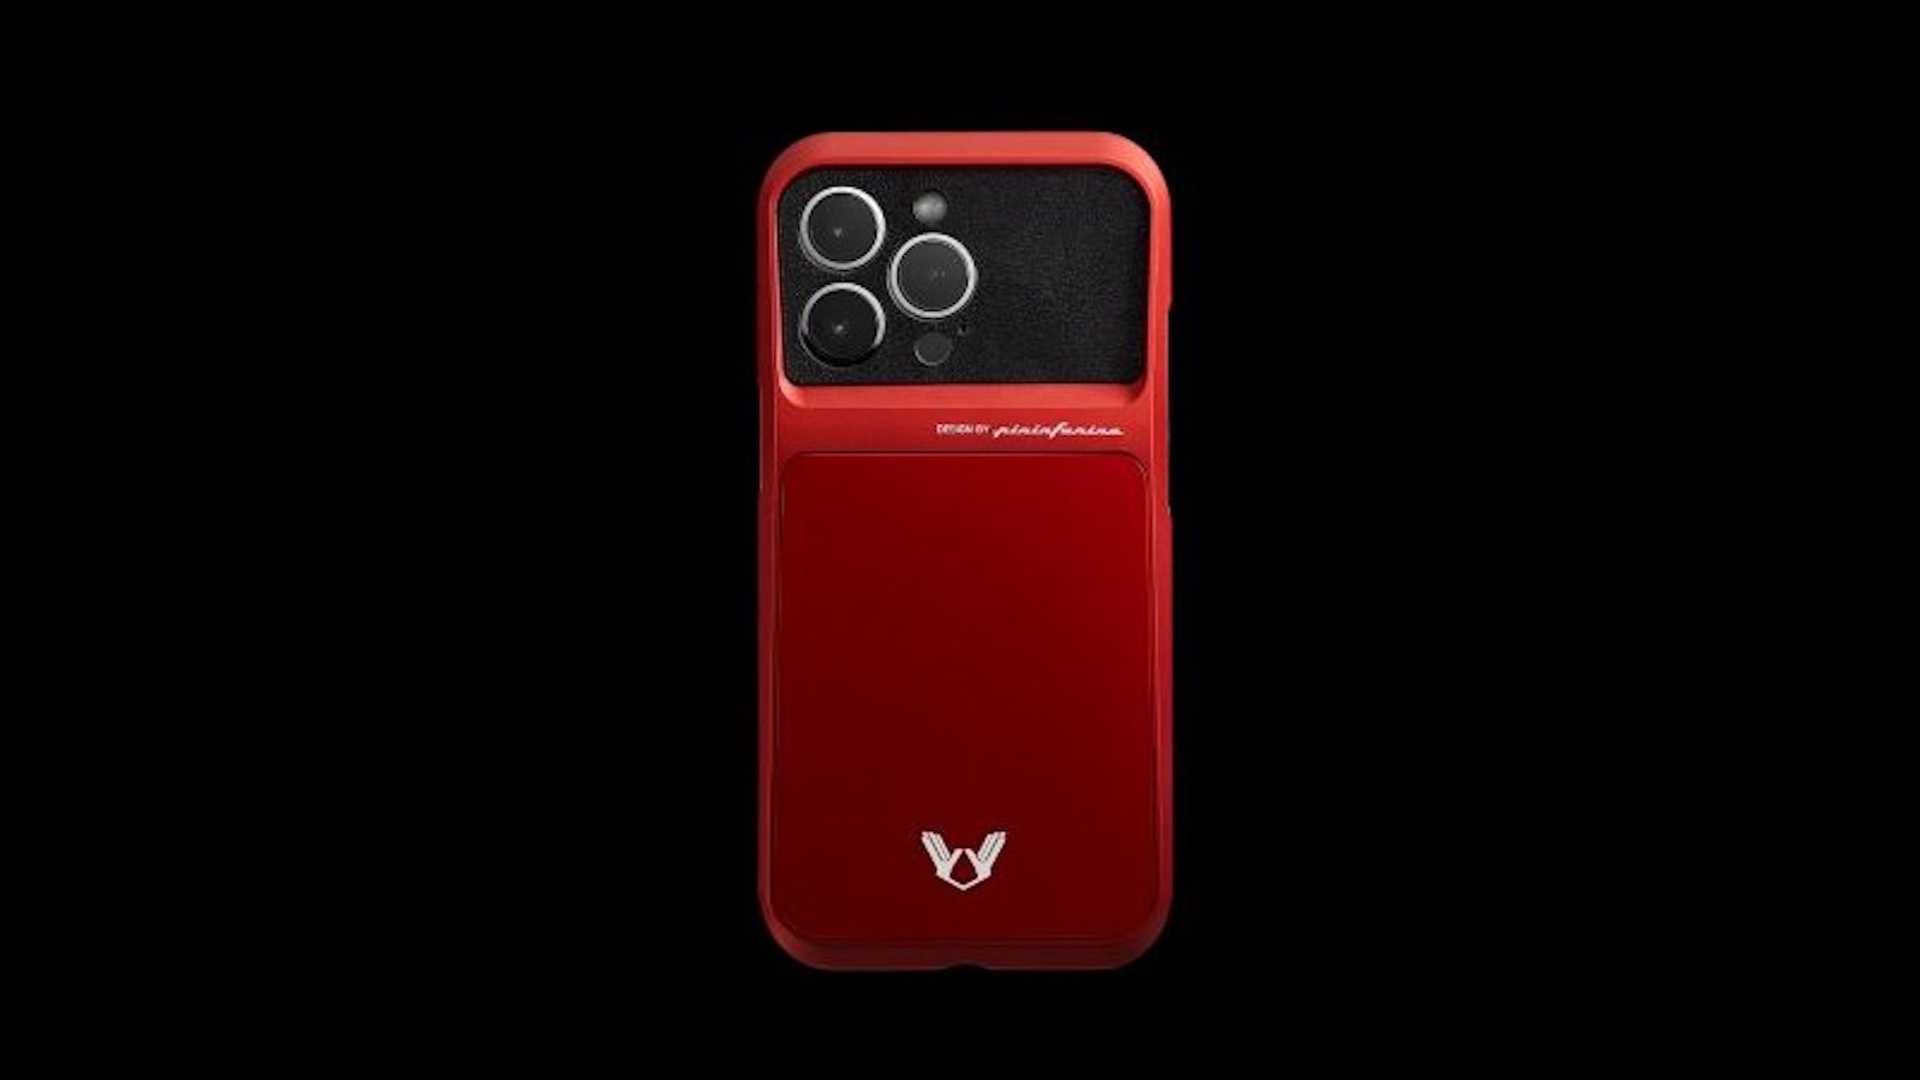 pininfarina-iphone-cases-inspired-by-modulo-concept6.jpg